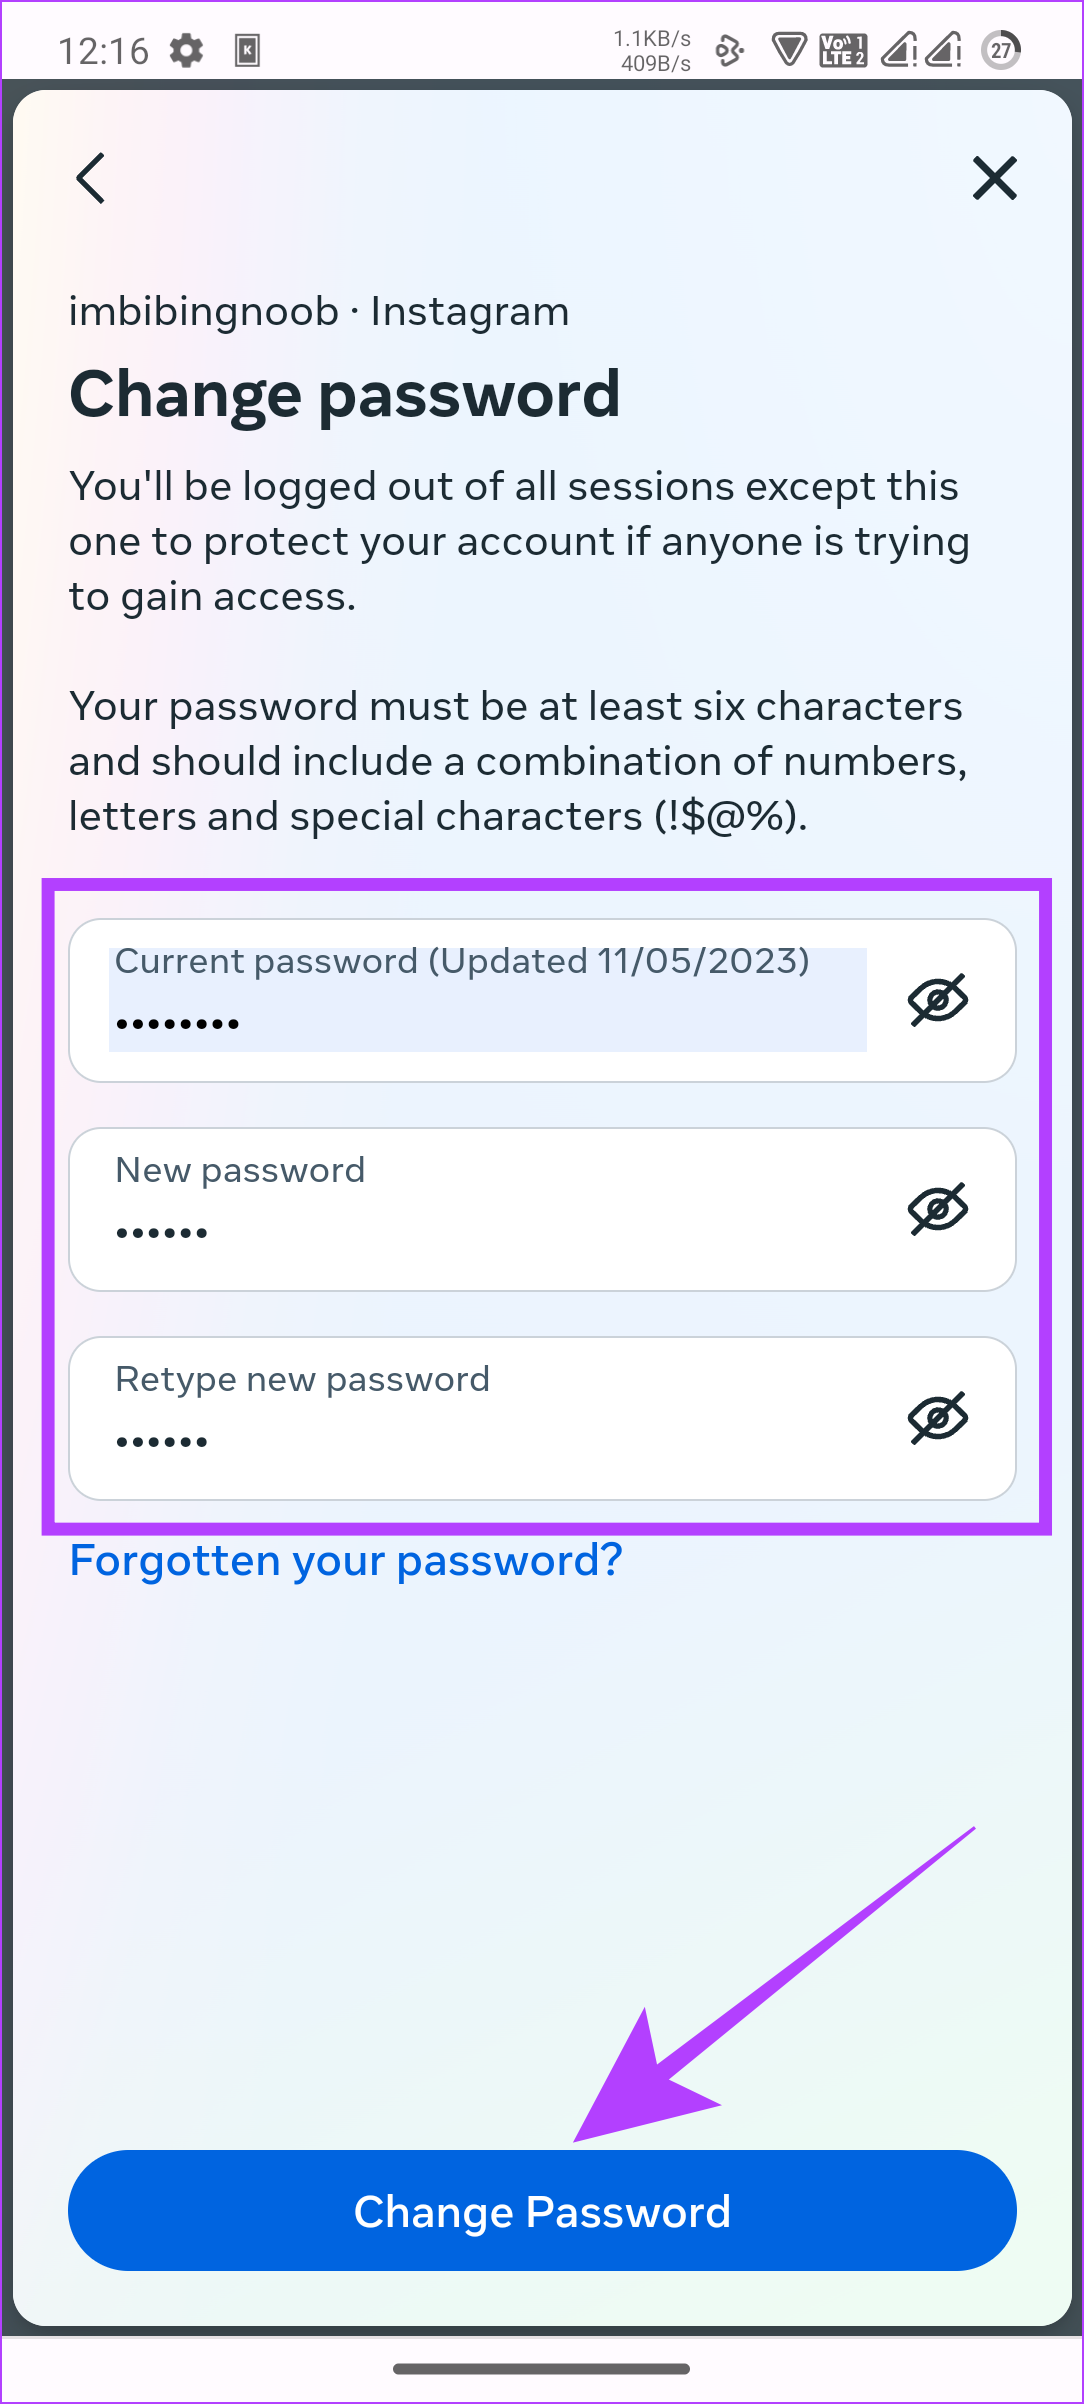 enter the new password and tap change password